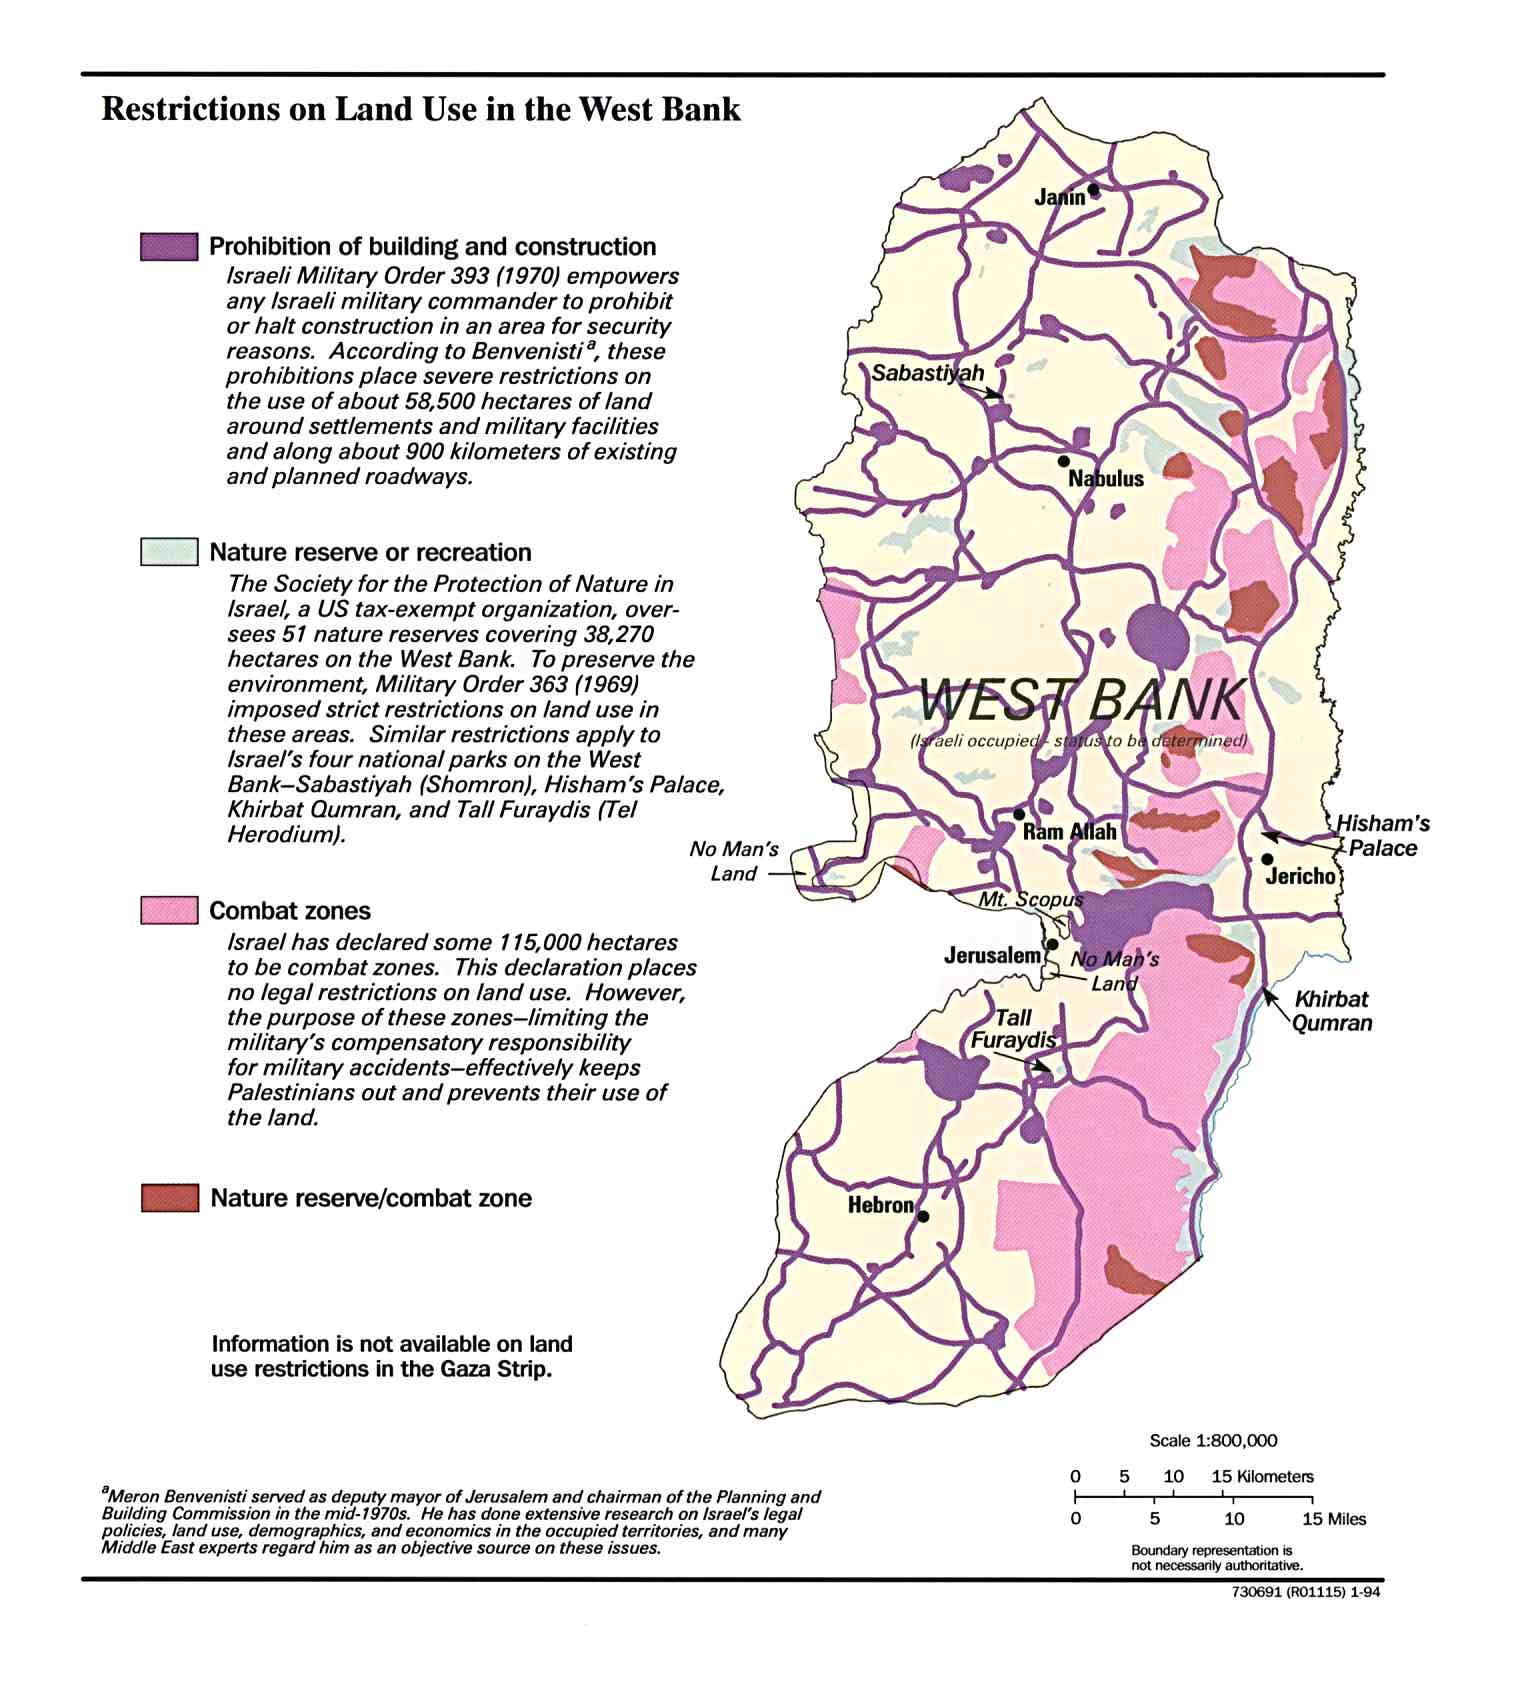 Map Of West Bank and Gaza Strip. West Bank, Restrictions on Land Use in December 1993 (191K) 